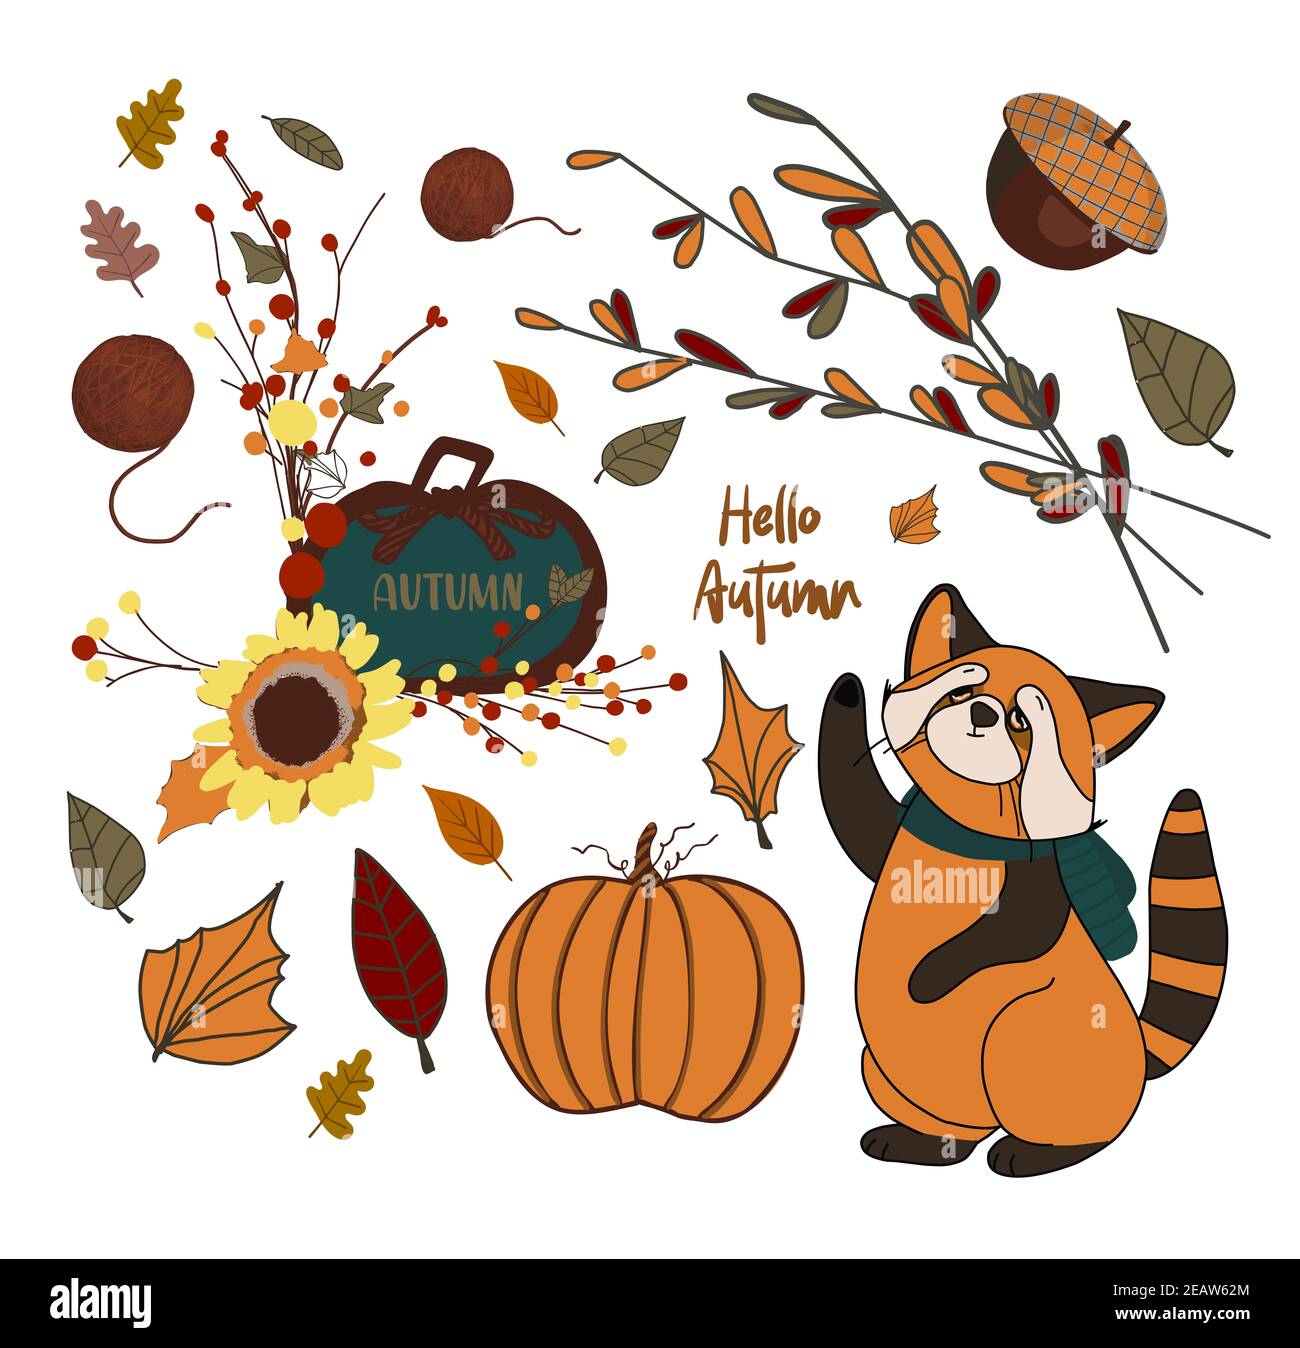 Set of cute autumn cartoon characters, plants and food. Fall season. Collection of scrapbook elements for party, harvest festival or Thanksgiving day Stock Photo